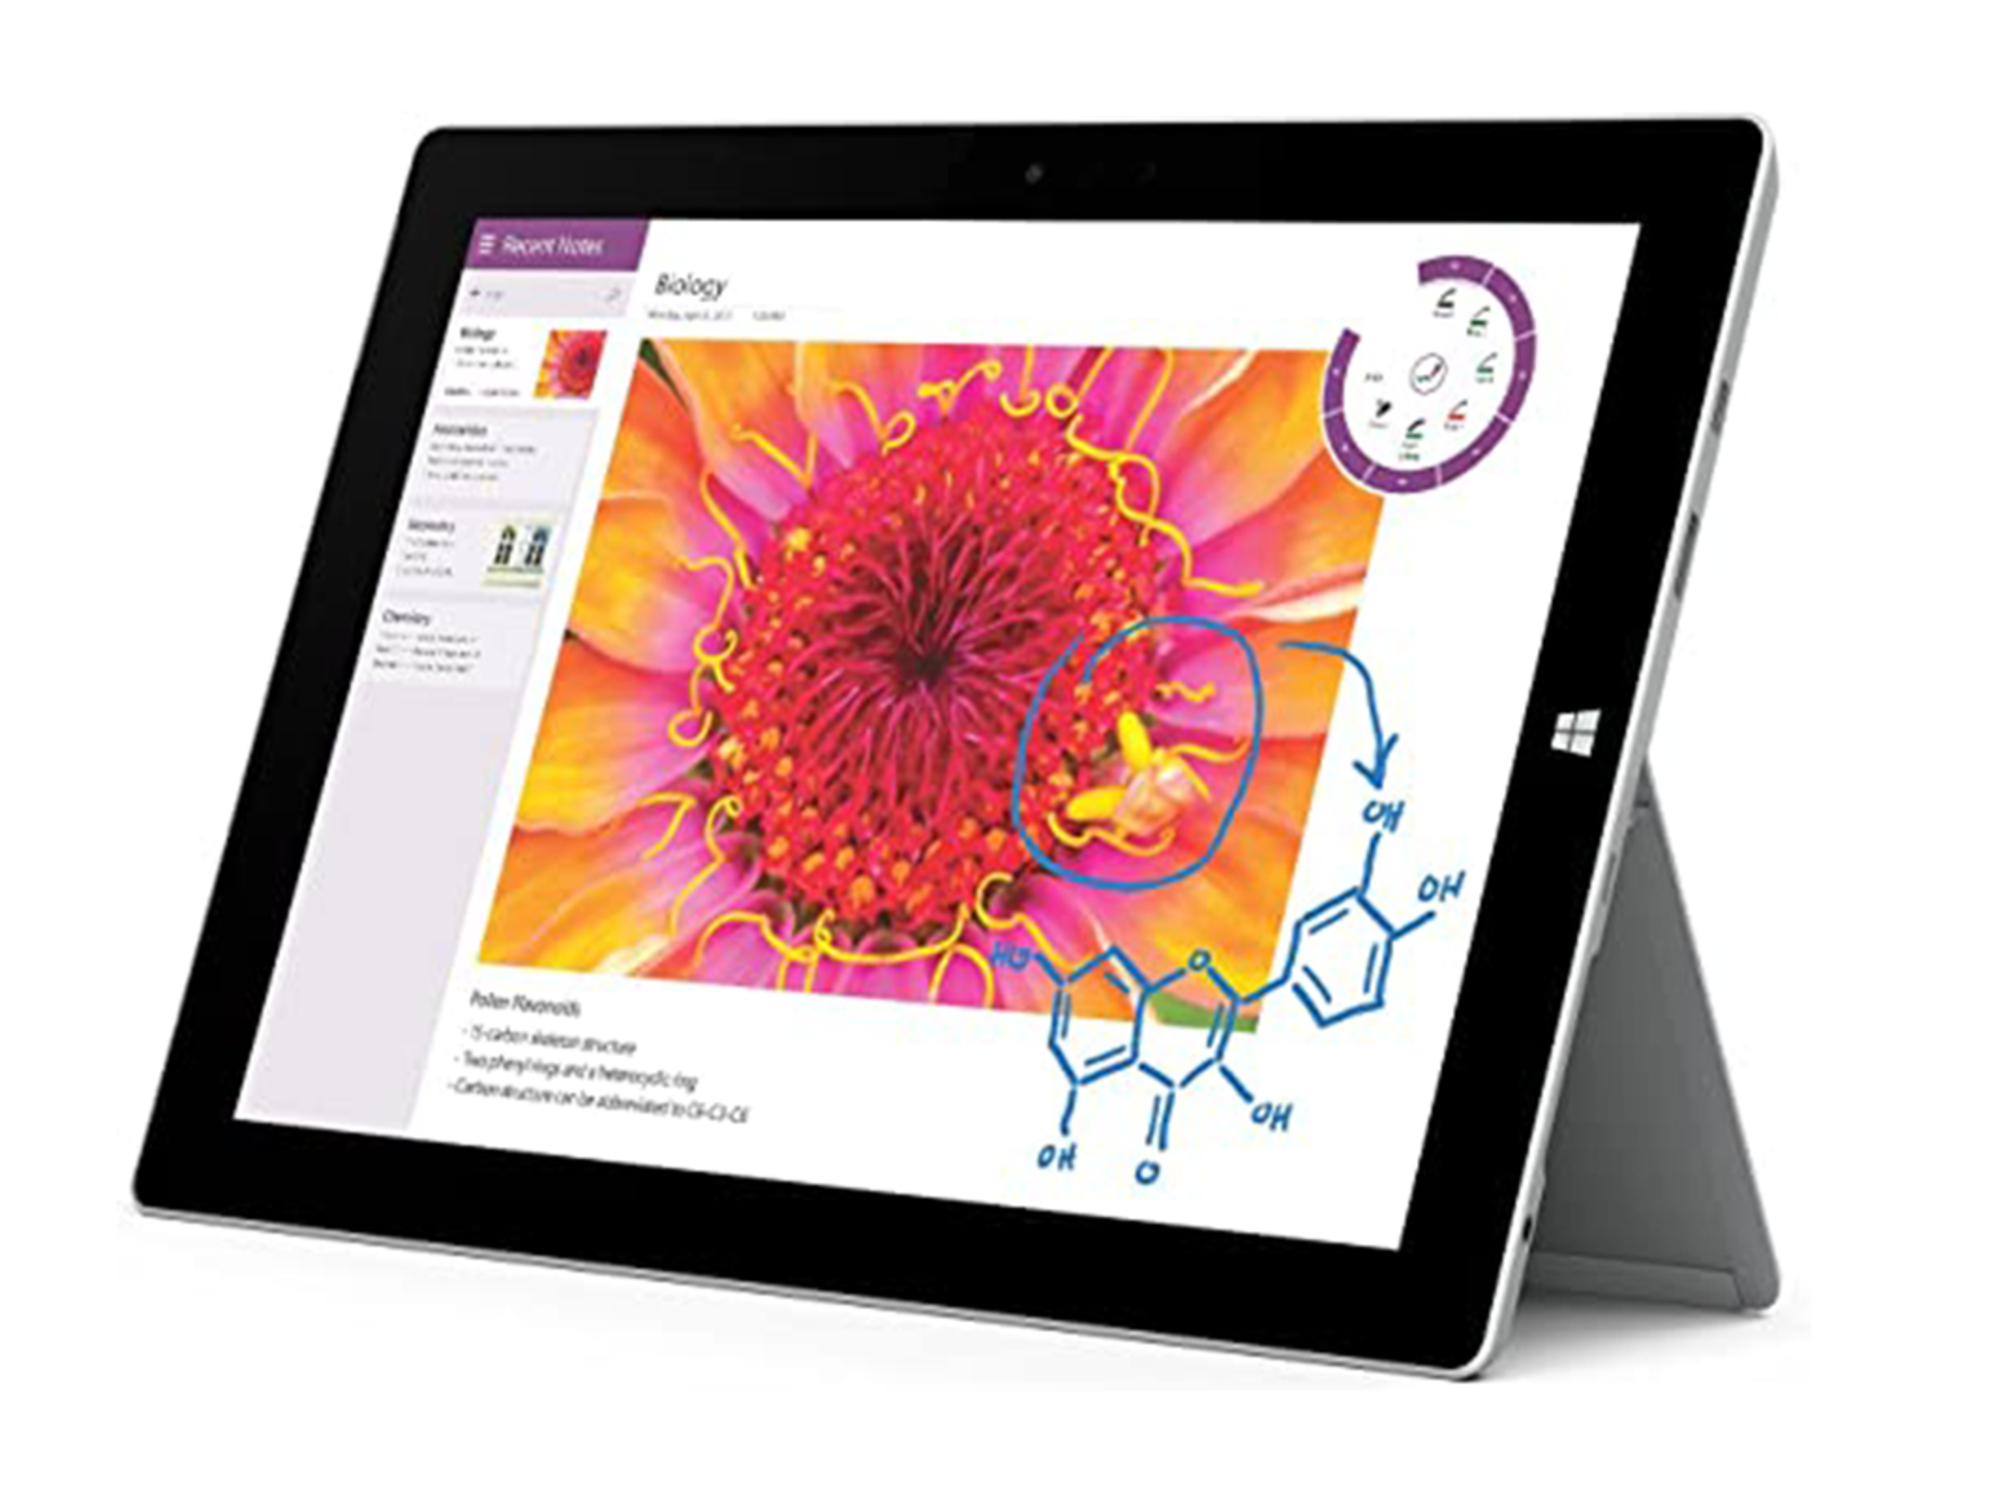 Score a near-mint Microsoft Surface 3 tablet for only $200